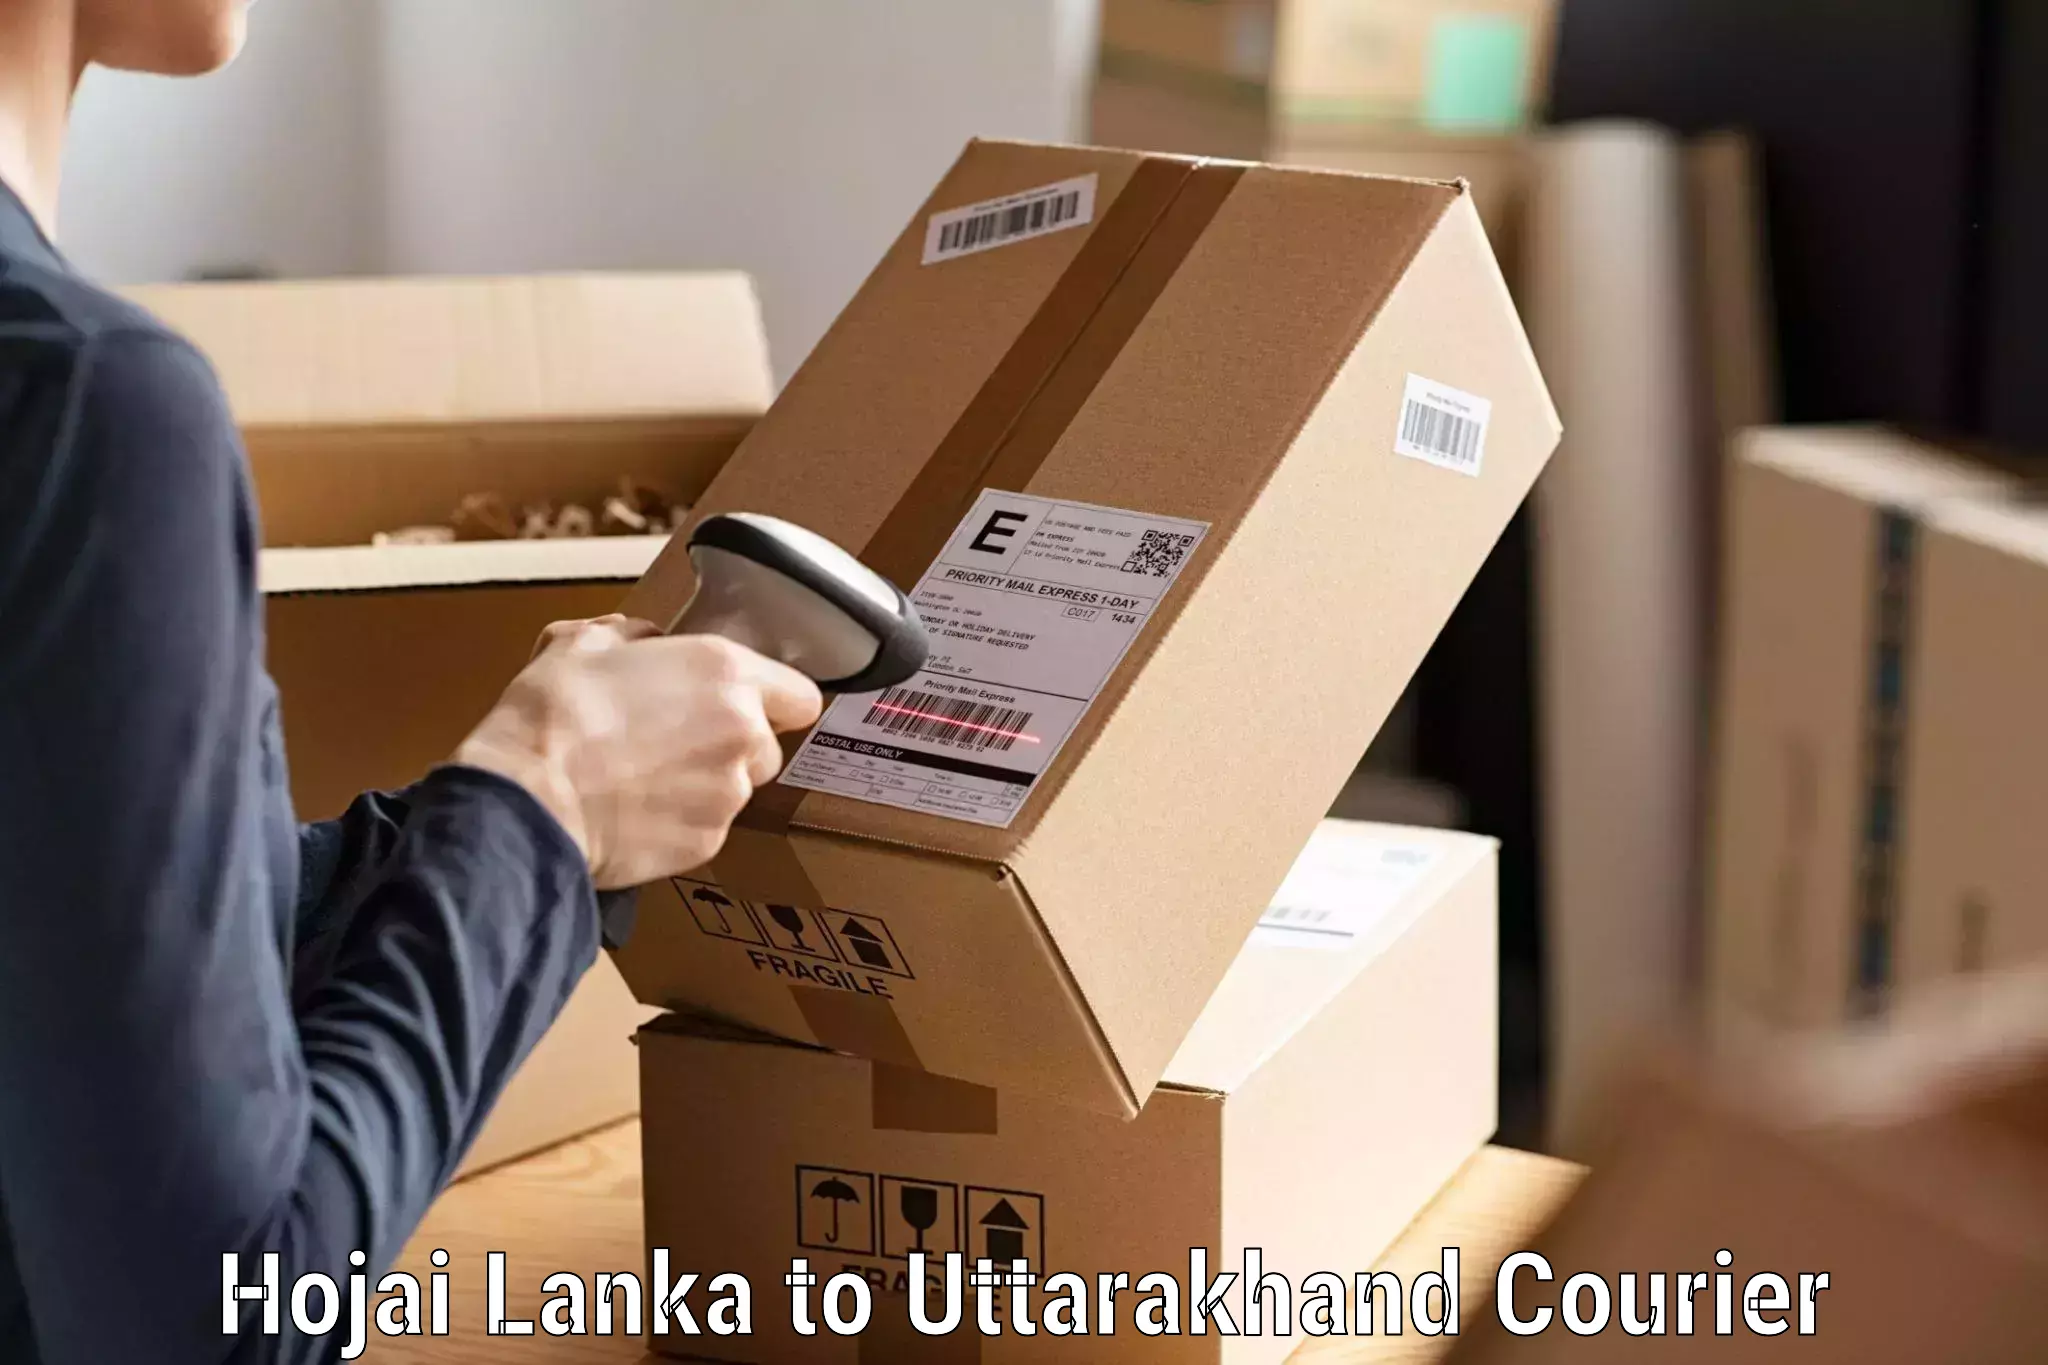 Reliable parcel services in Hojai Lanka to Khatima